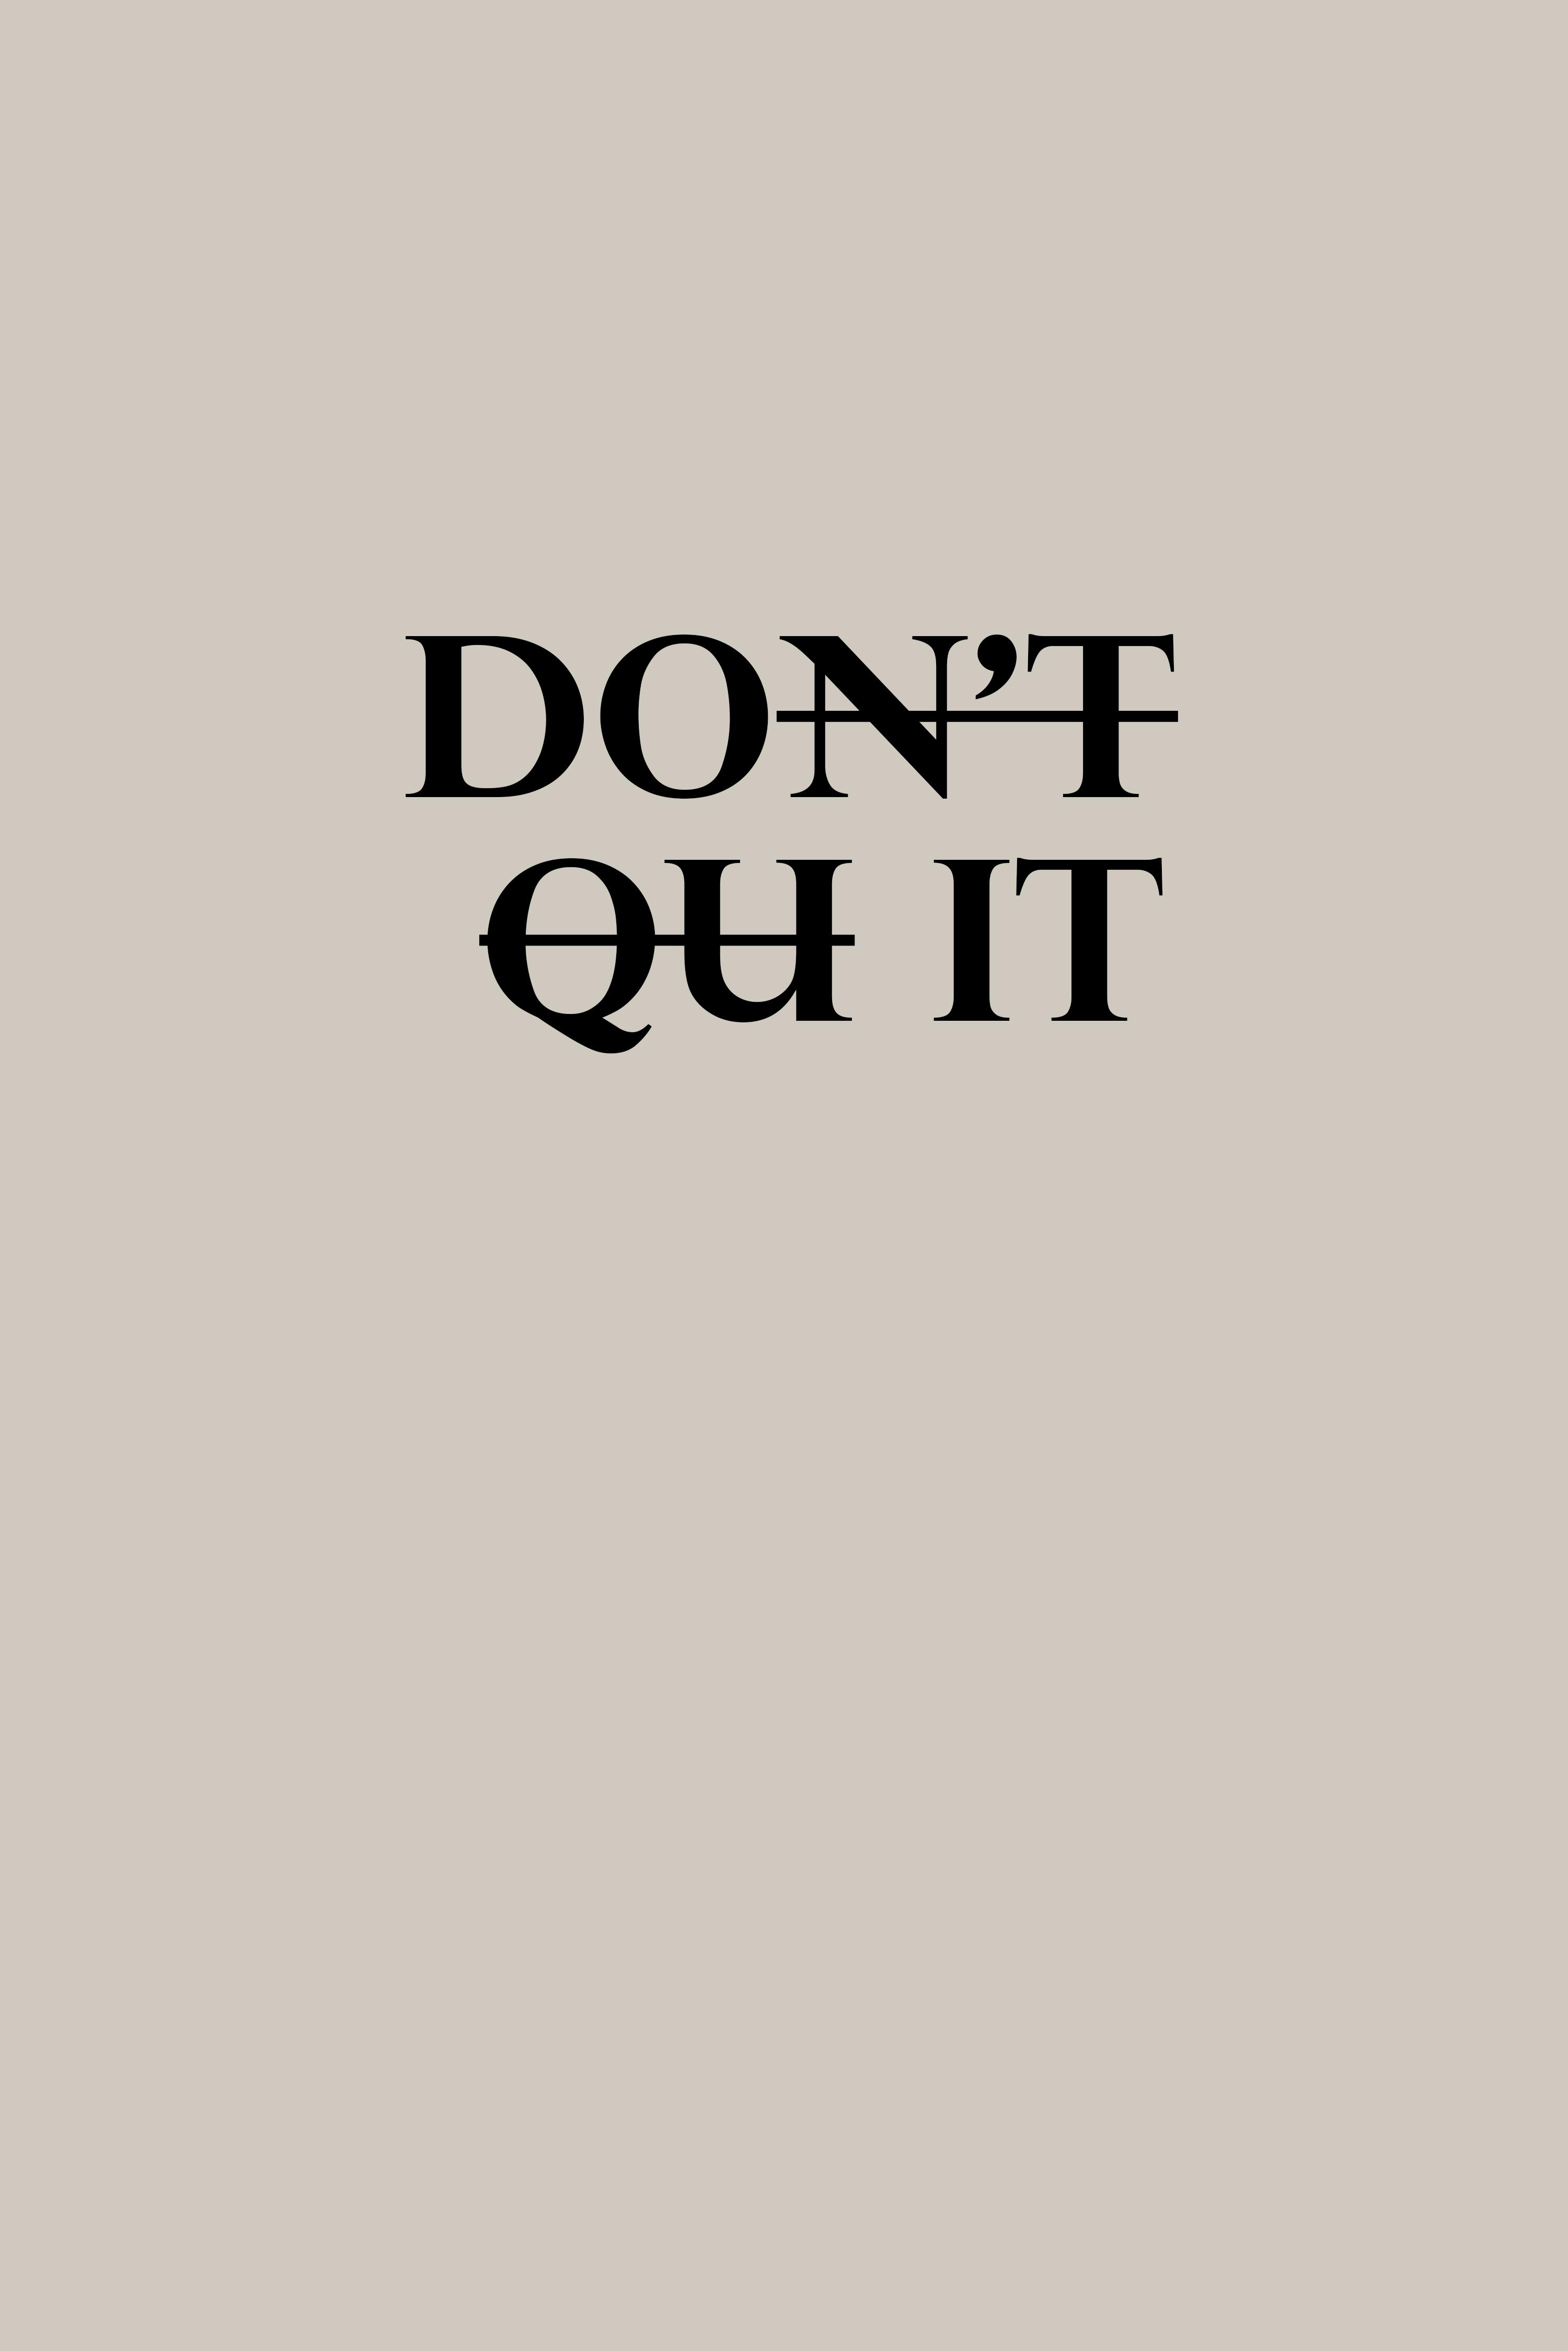 Do it for your Future Self  Motivational Quotes  Aesthetic iPhone  Wallpapers  Pretty phone wallpaper Iphone wallpaper vintage quotes  Thought wallpaper